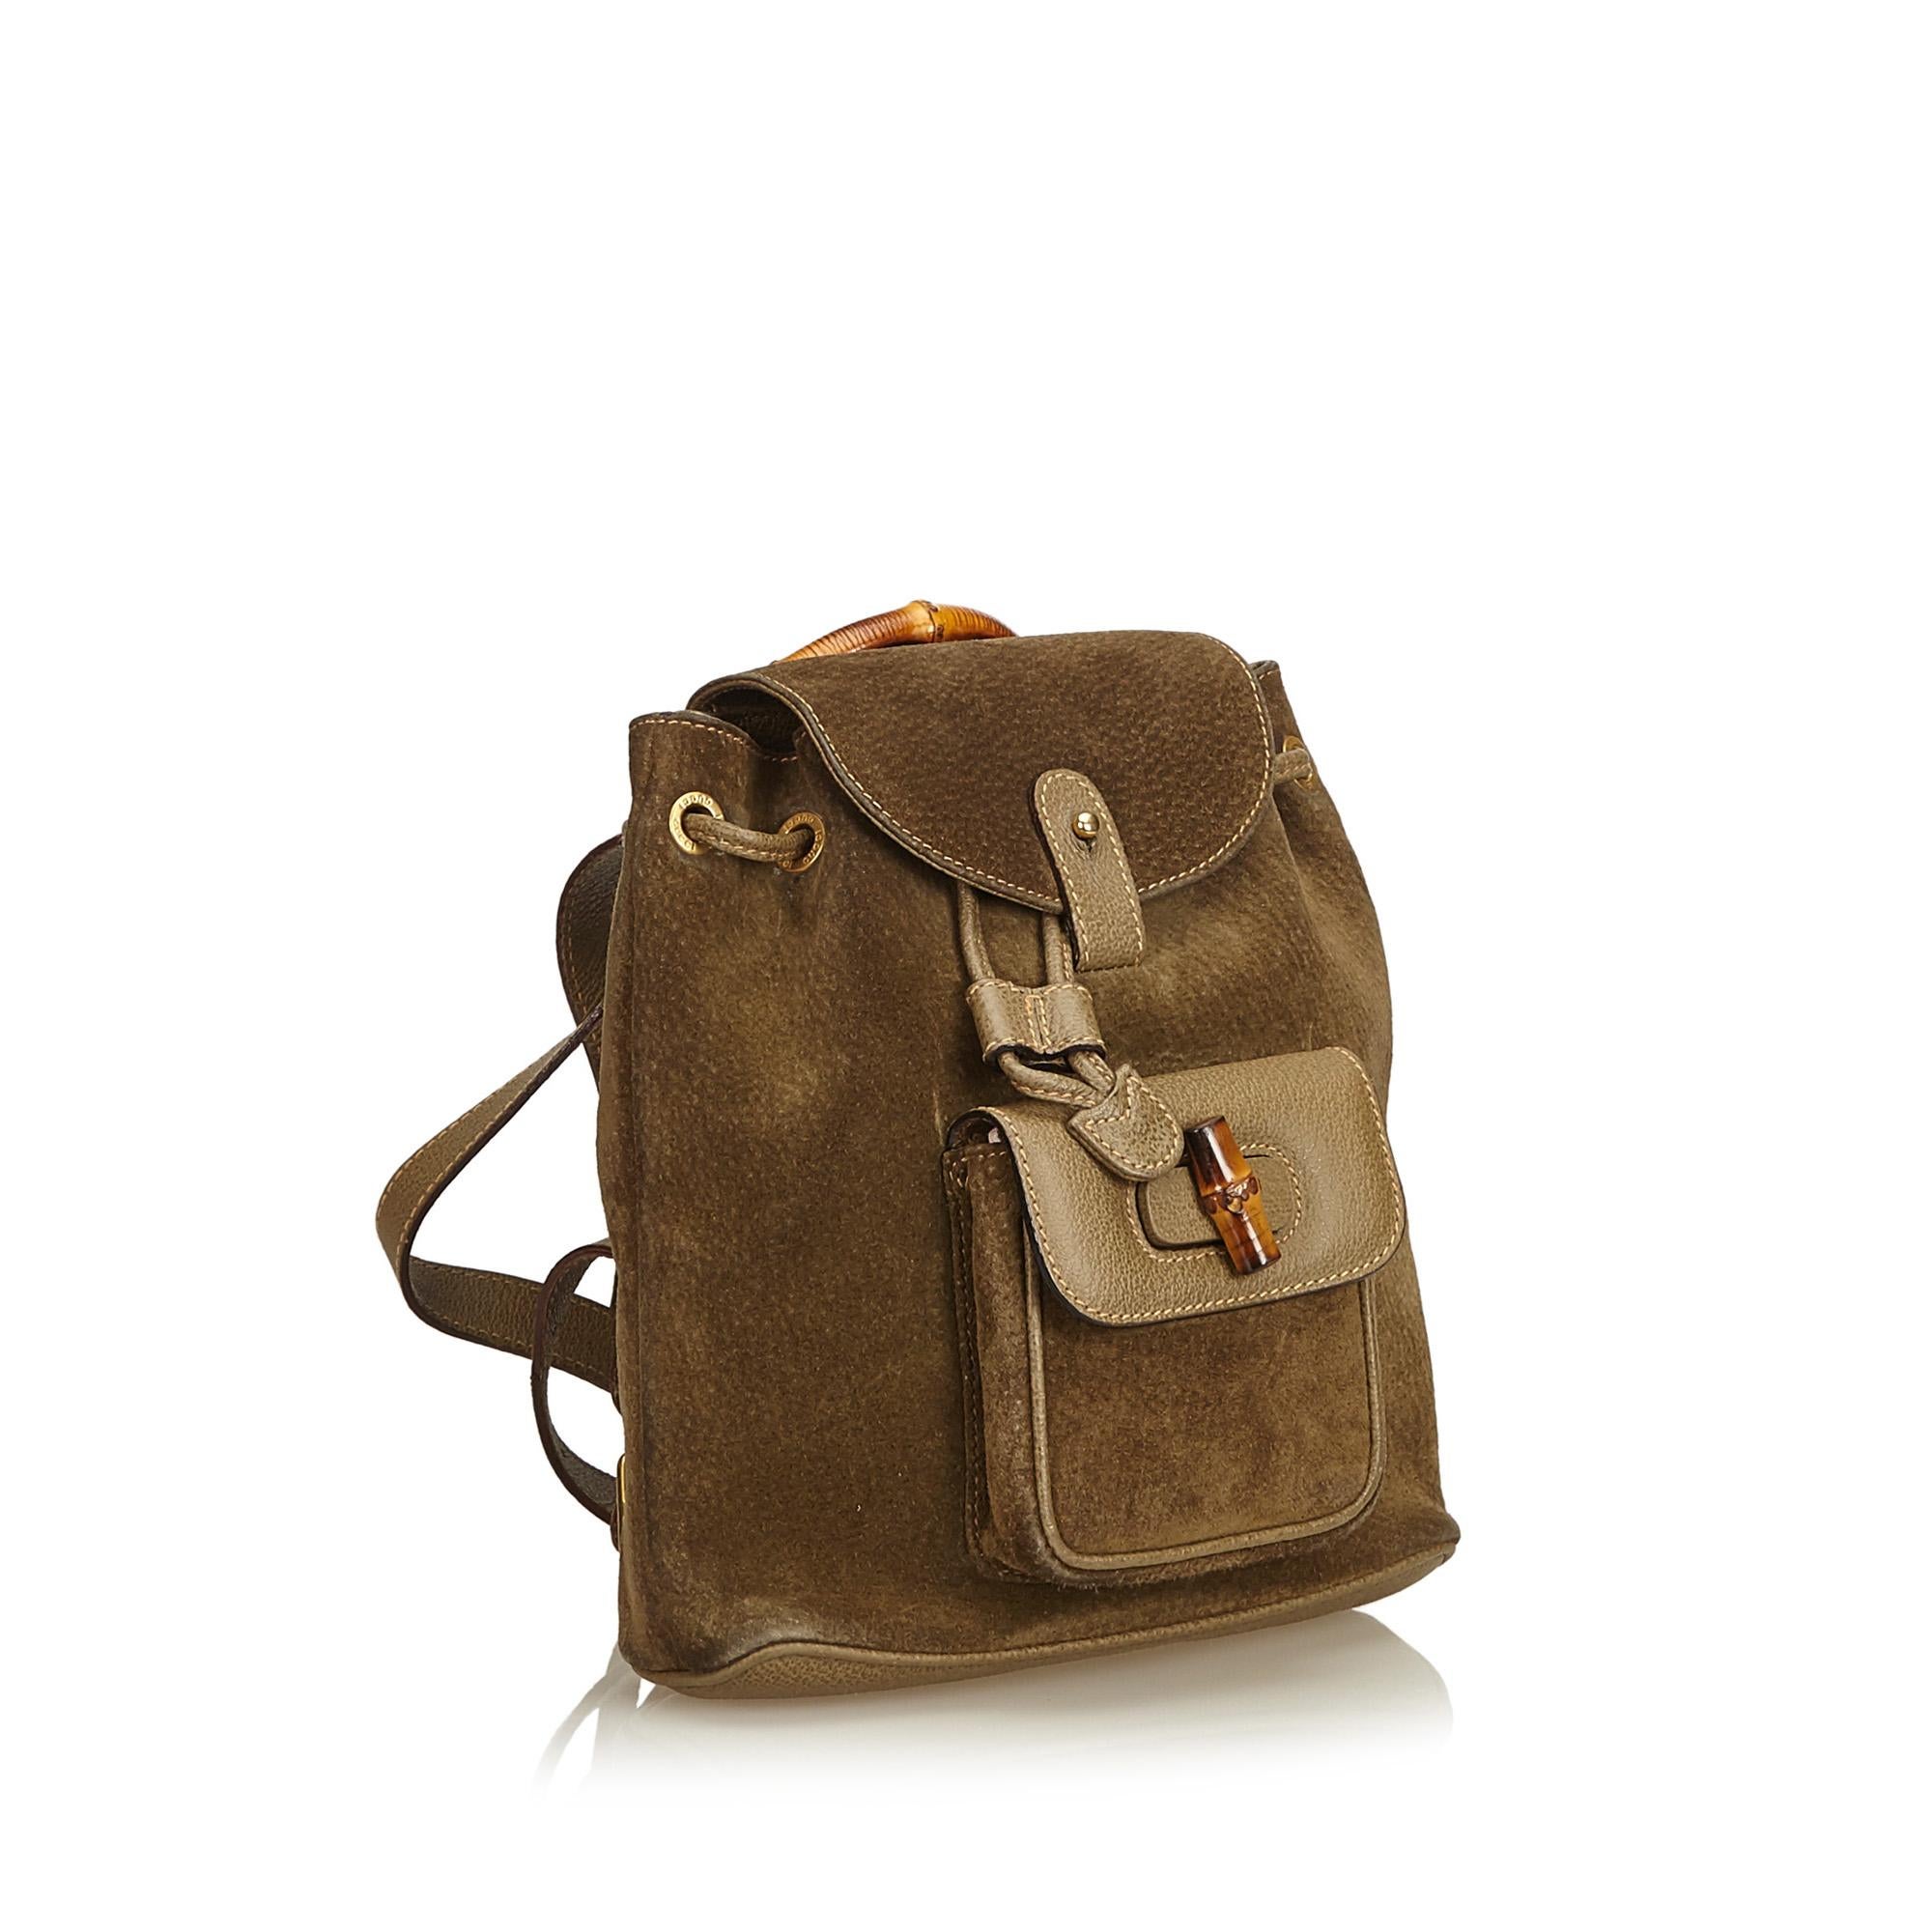 This backpack features a suede body, flat leather back straps, bamboo top handle, top flap with button closure, drawstring closure, exterior flap pocket with bamboo twist lock closure, and an interior zip pocket. It carries as B condition